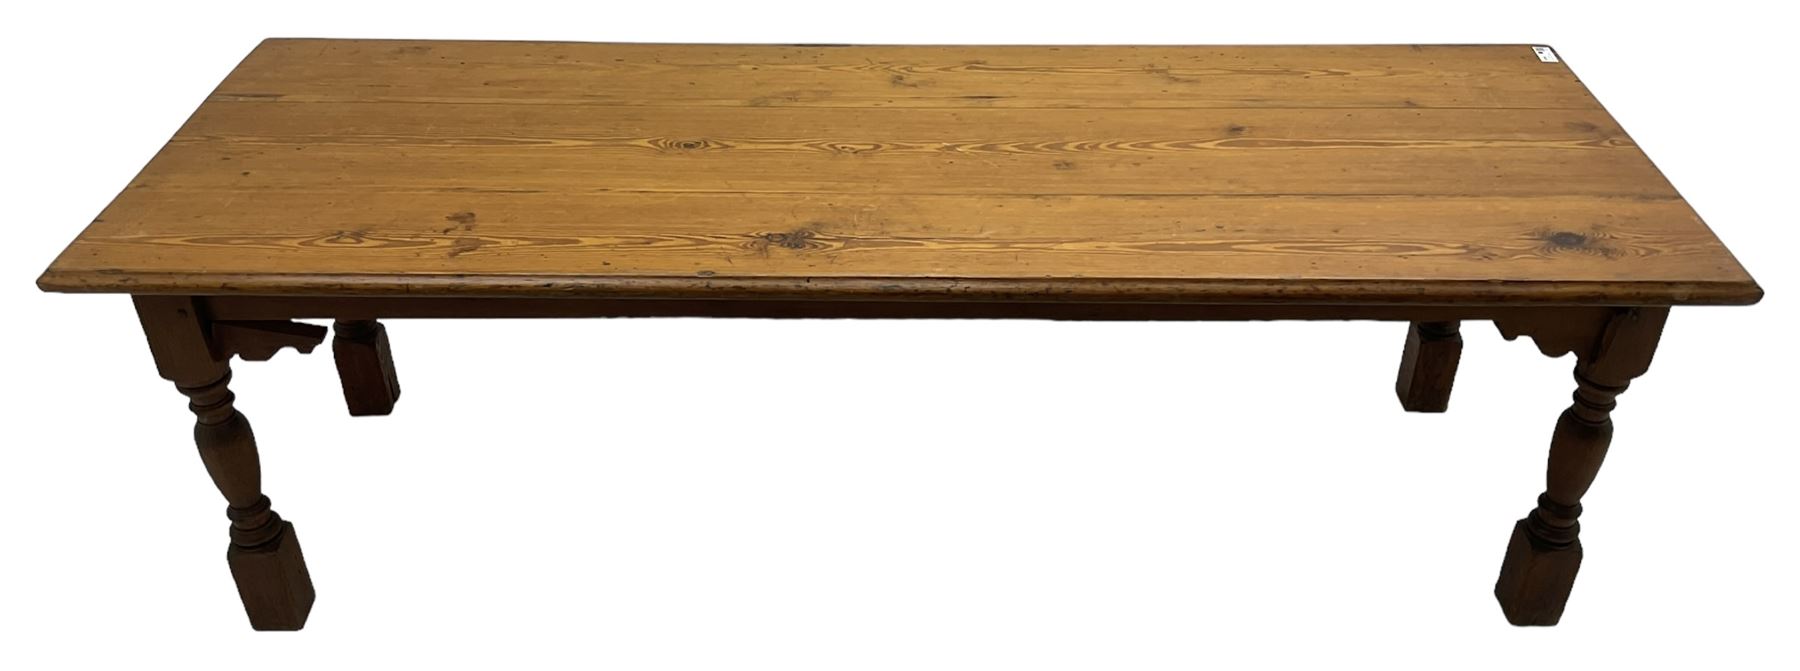 Large Victorian pitch pine farmhouse table - Image 6 of 6